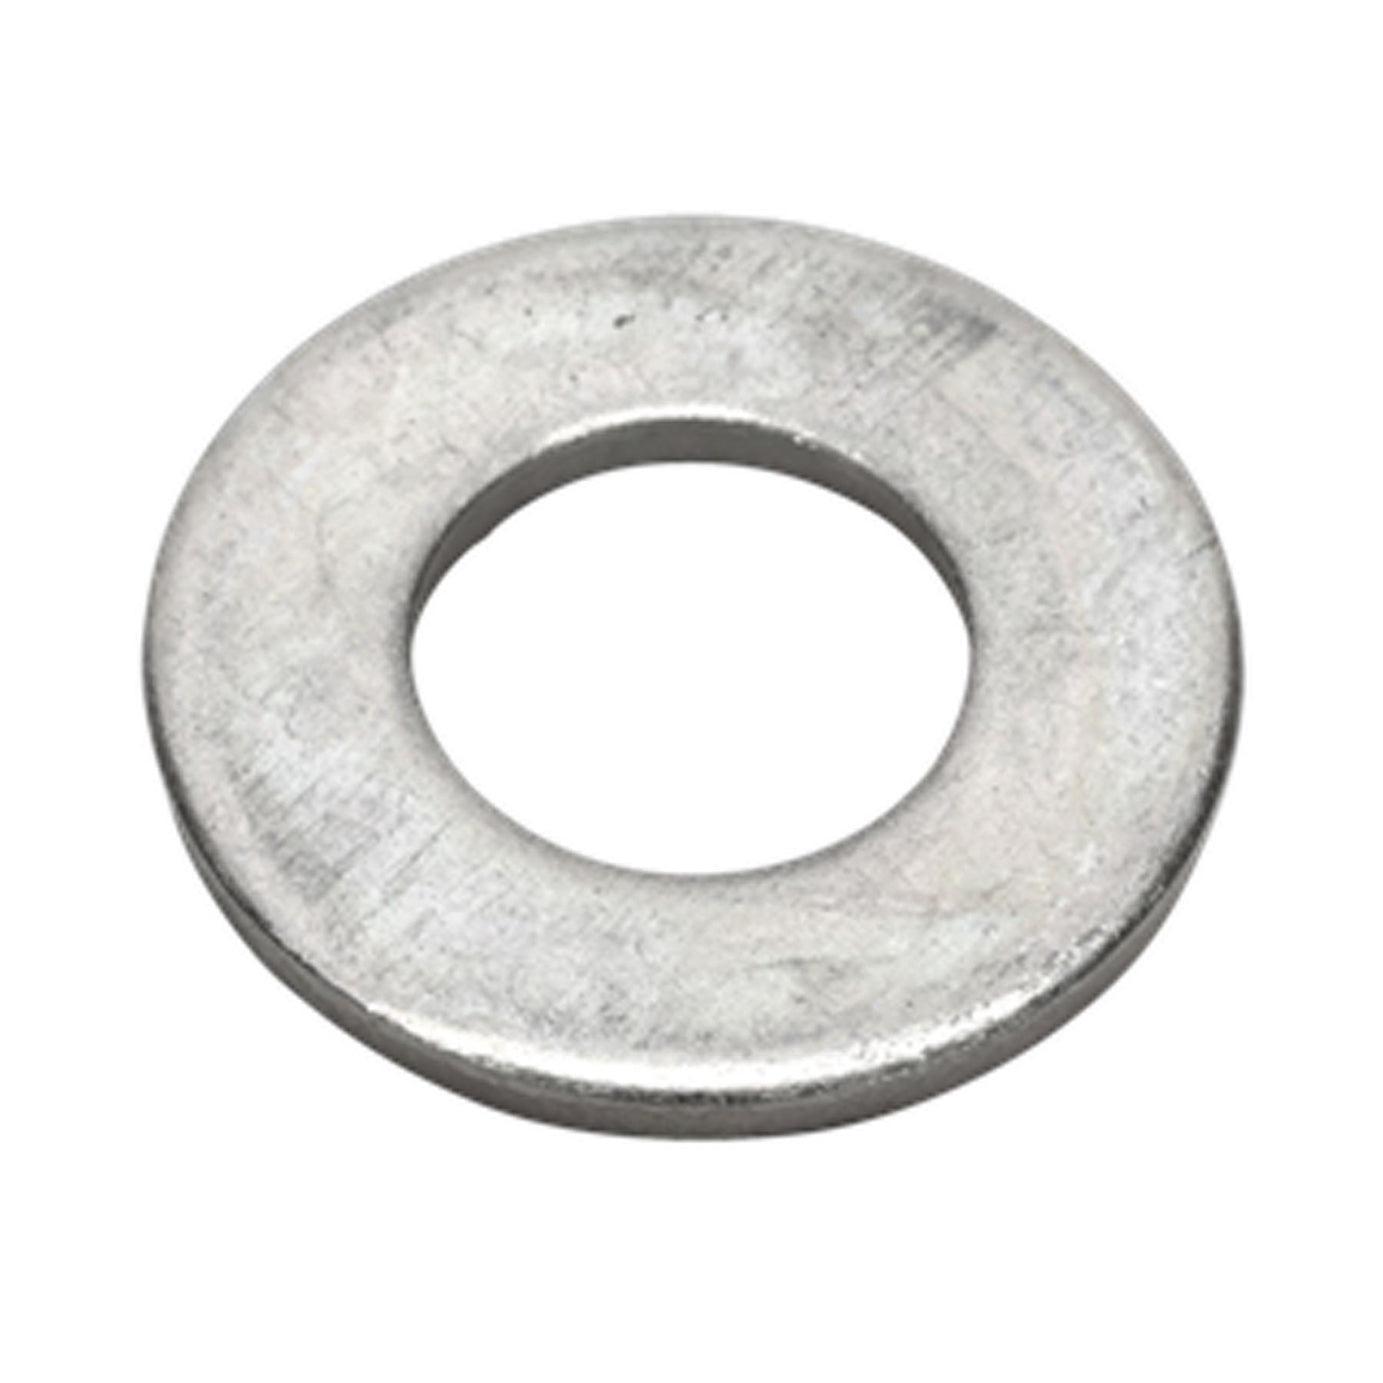 Sealey Flat Washer BS 4320 M16 x 34mm Form C Pack of 50